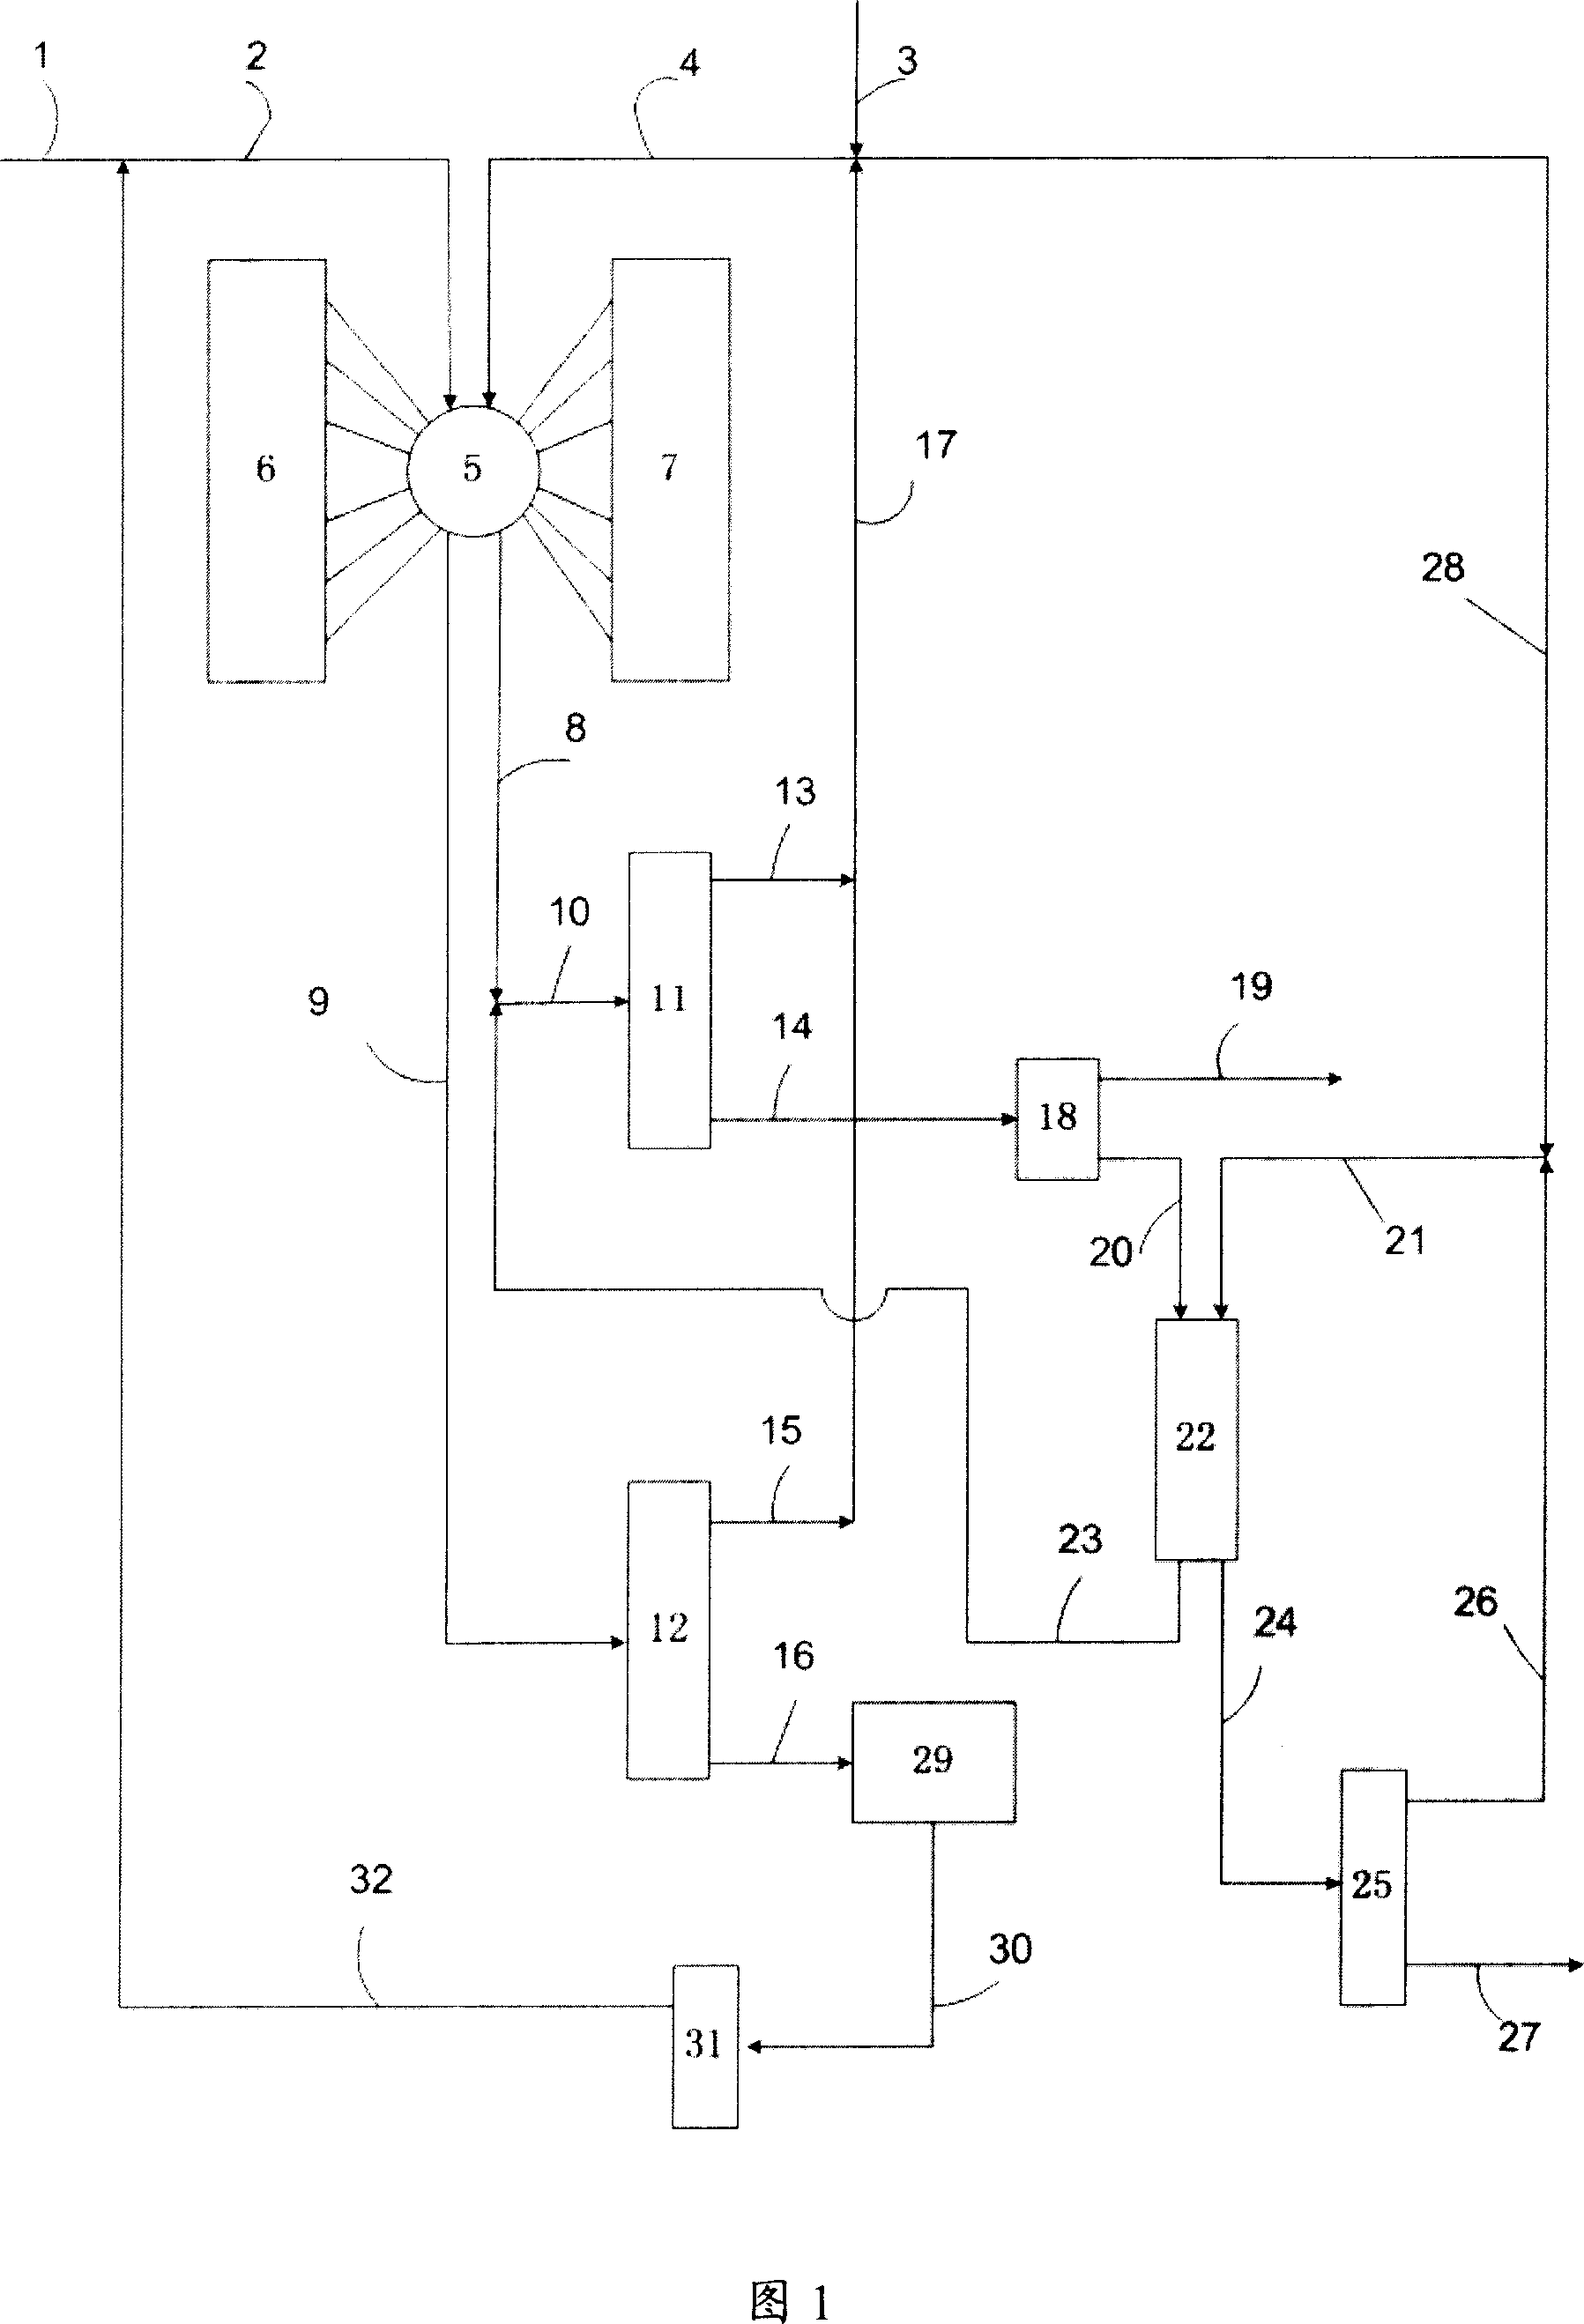 Method for adsorbing-crystal separation of paraxylene and ethylbenzene from C8 aromatic